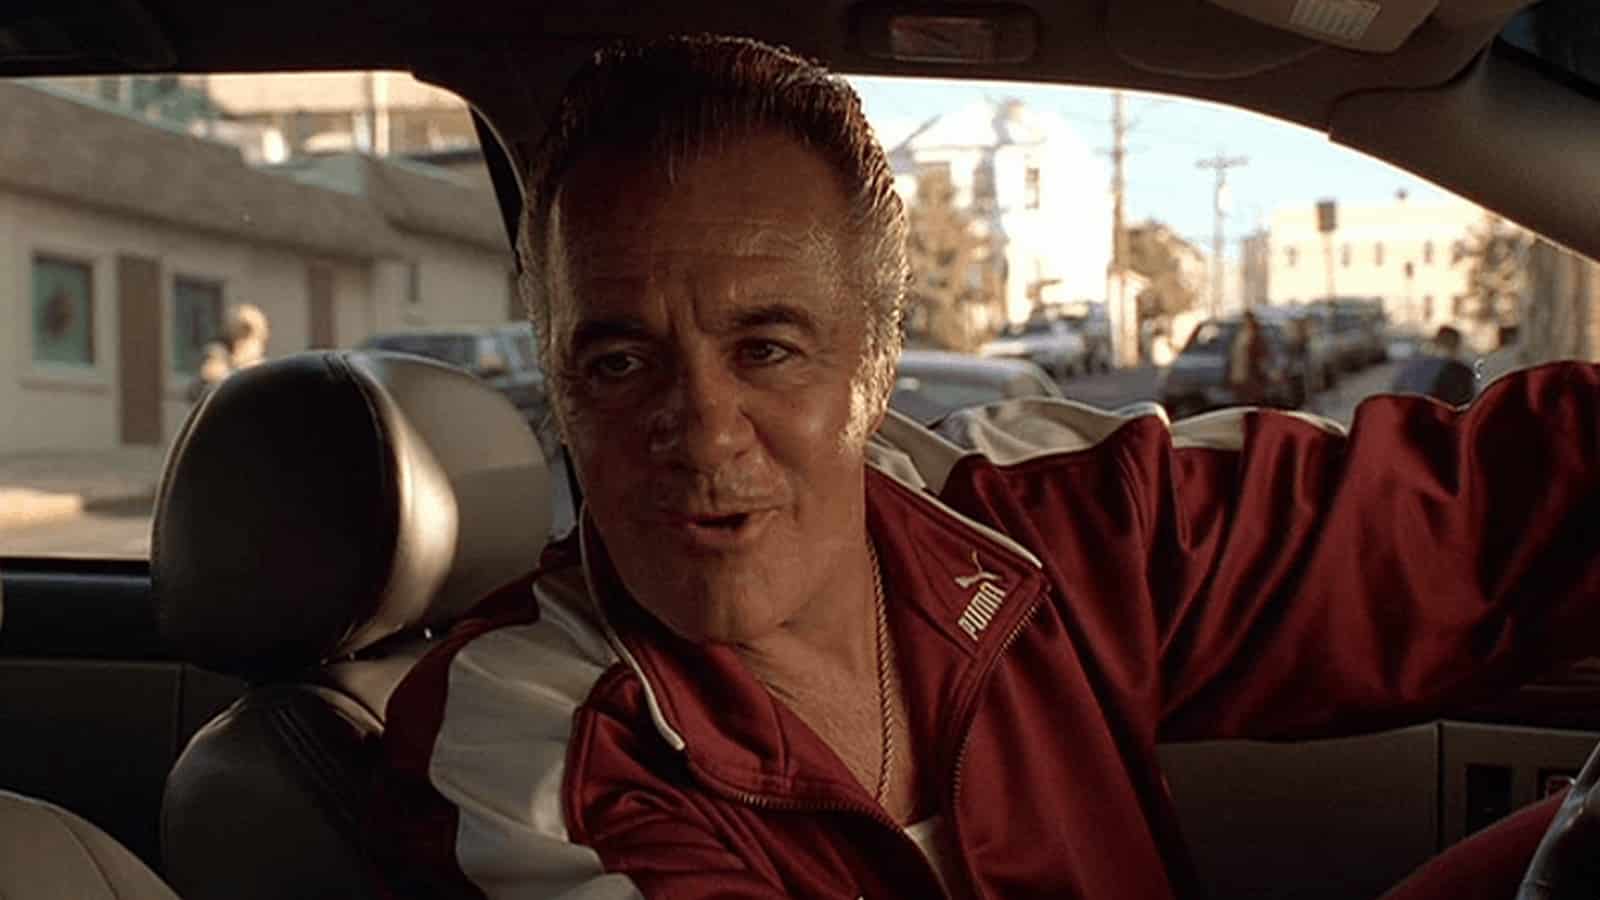 An image of Tony Sirico as Paulie in The Sopranos